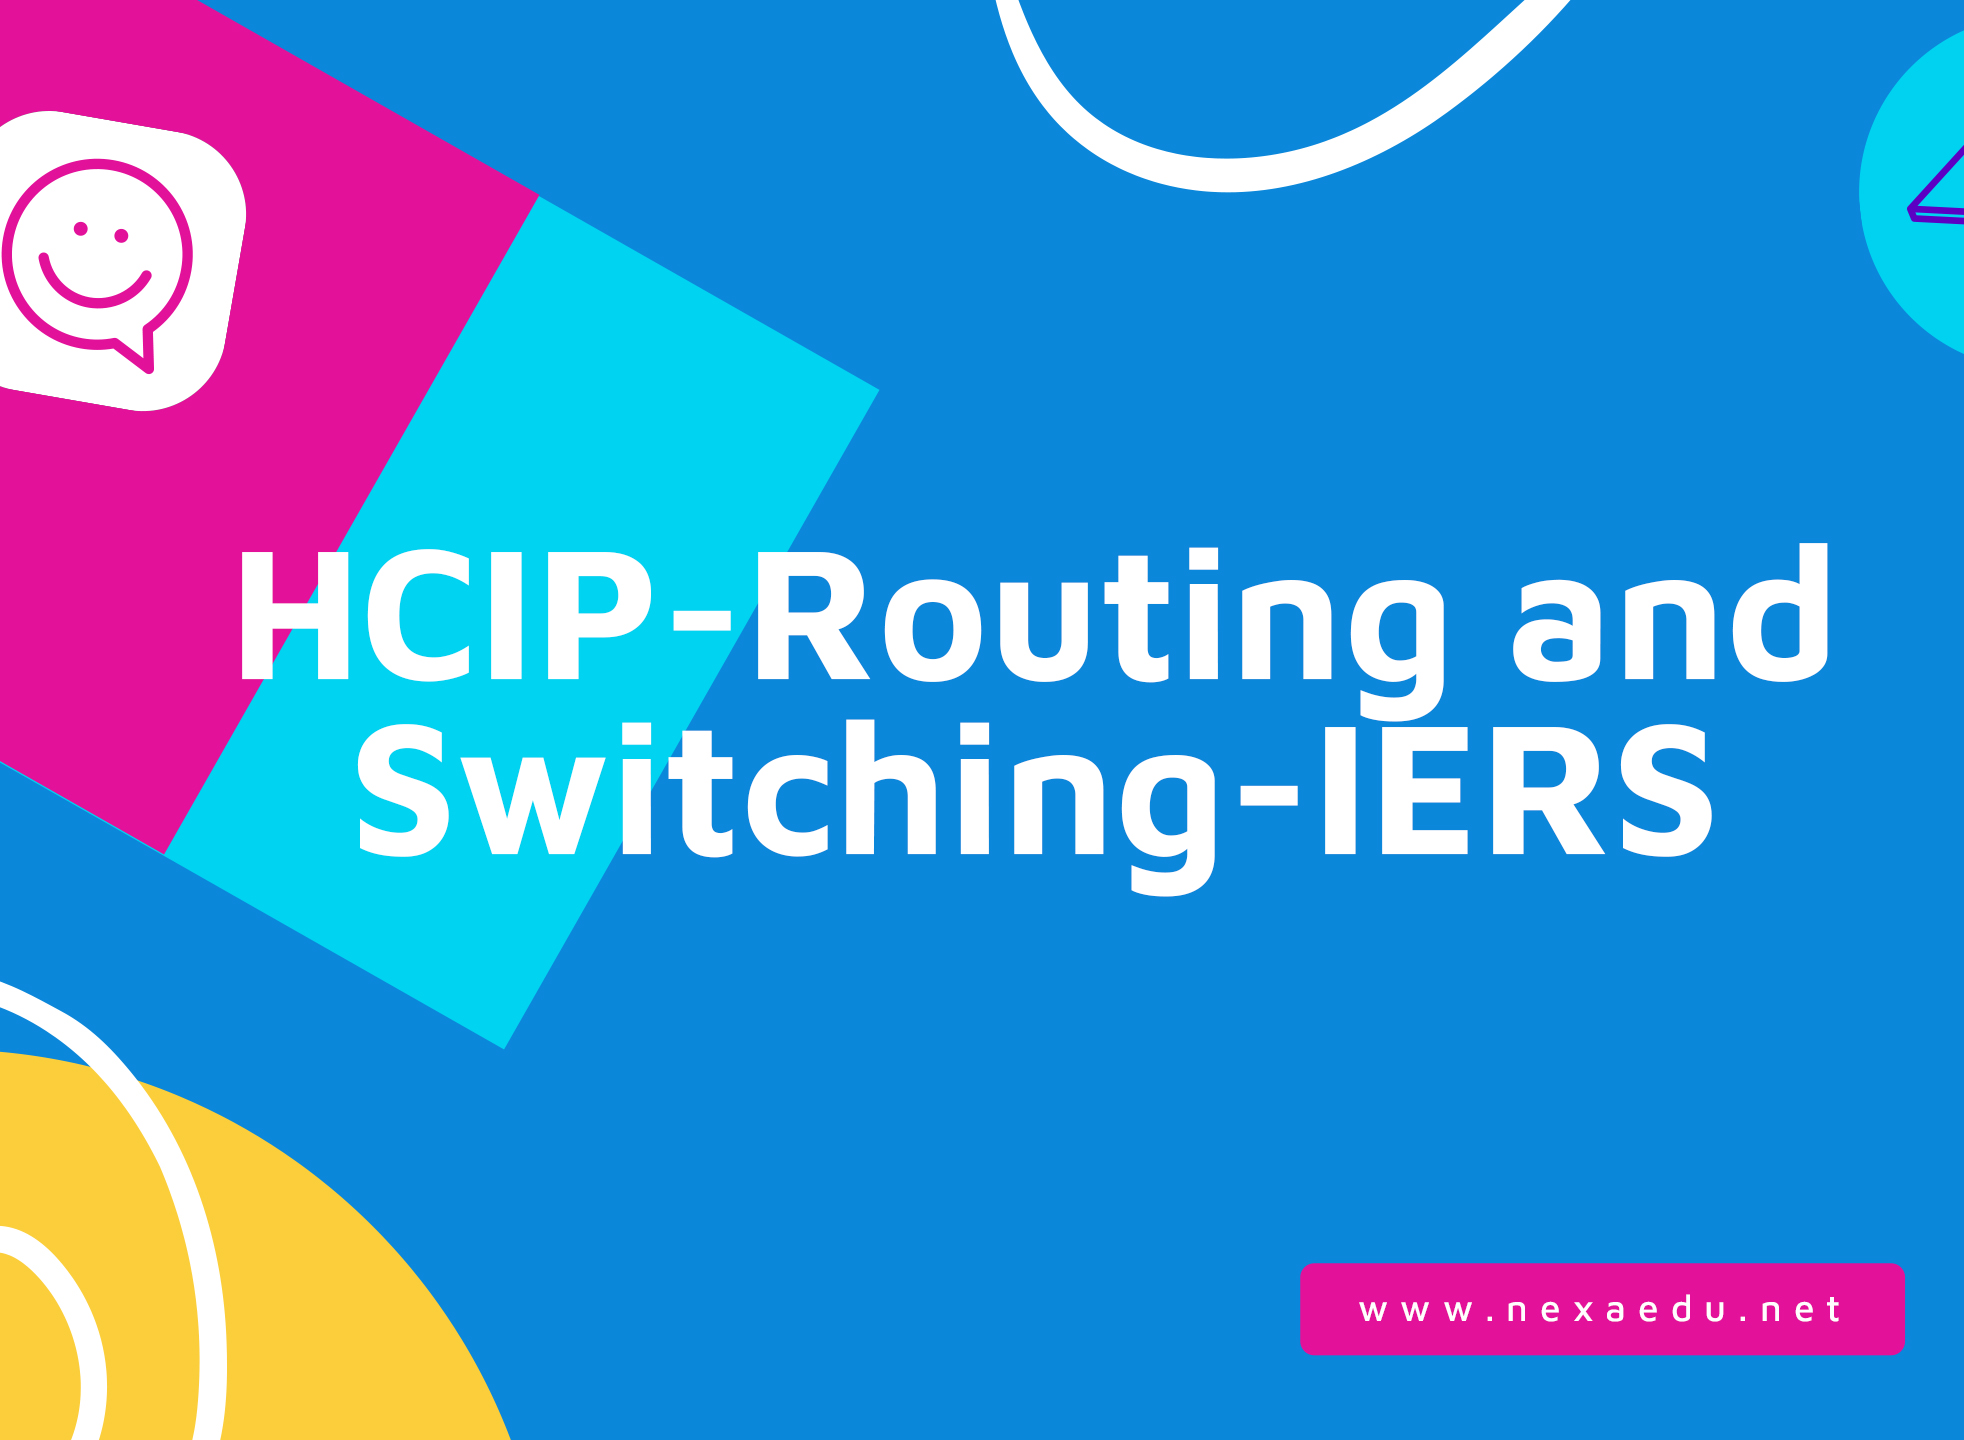 HCIP-Routing and Switching-IERS